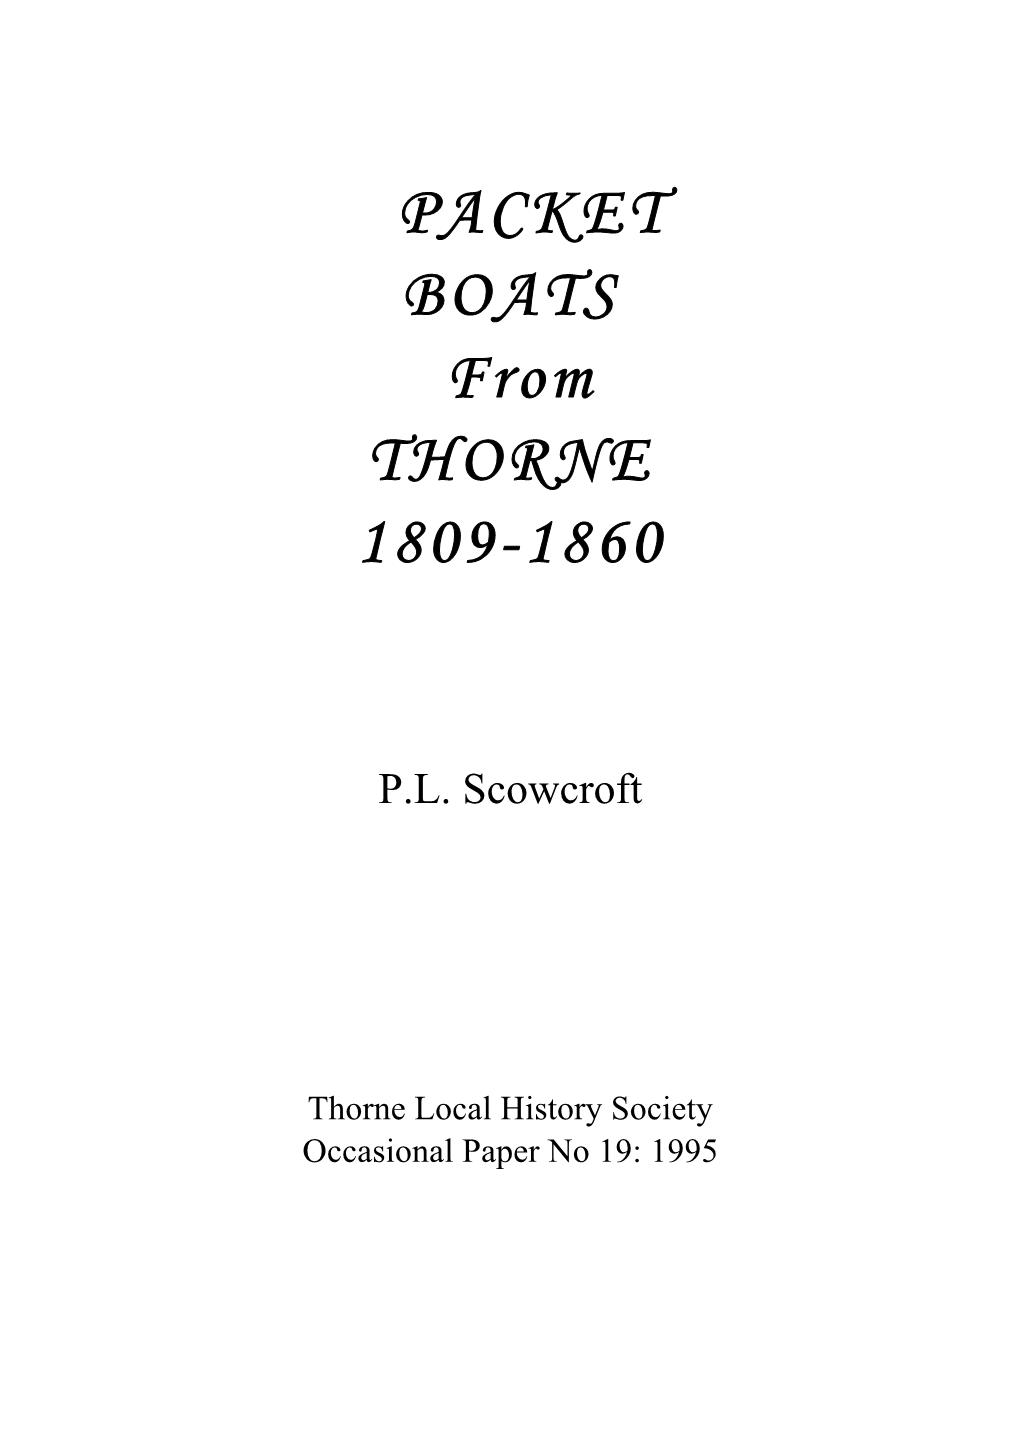 PACKET BOATS from THORNE 1809-1860